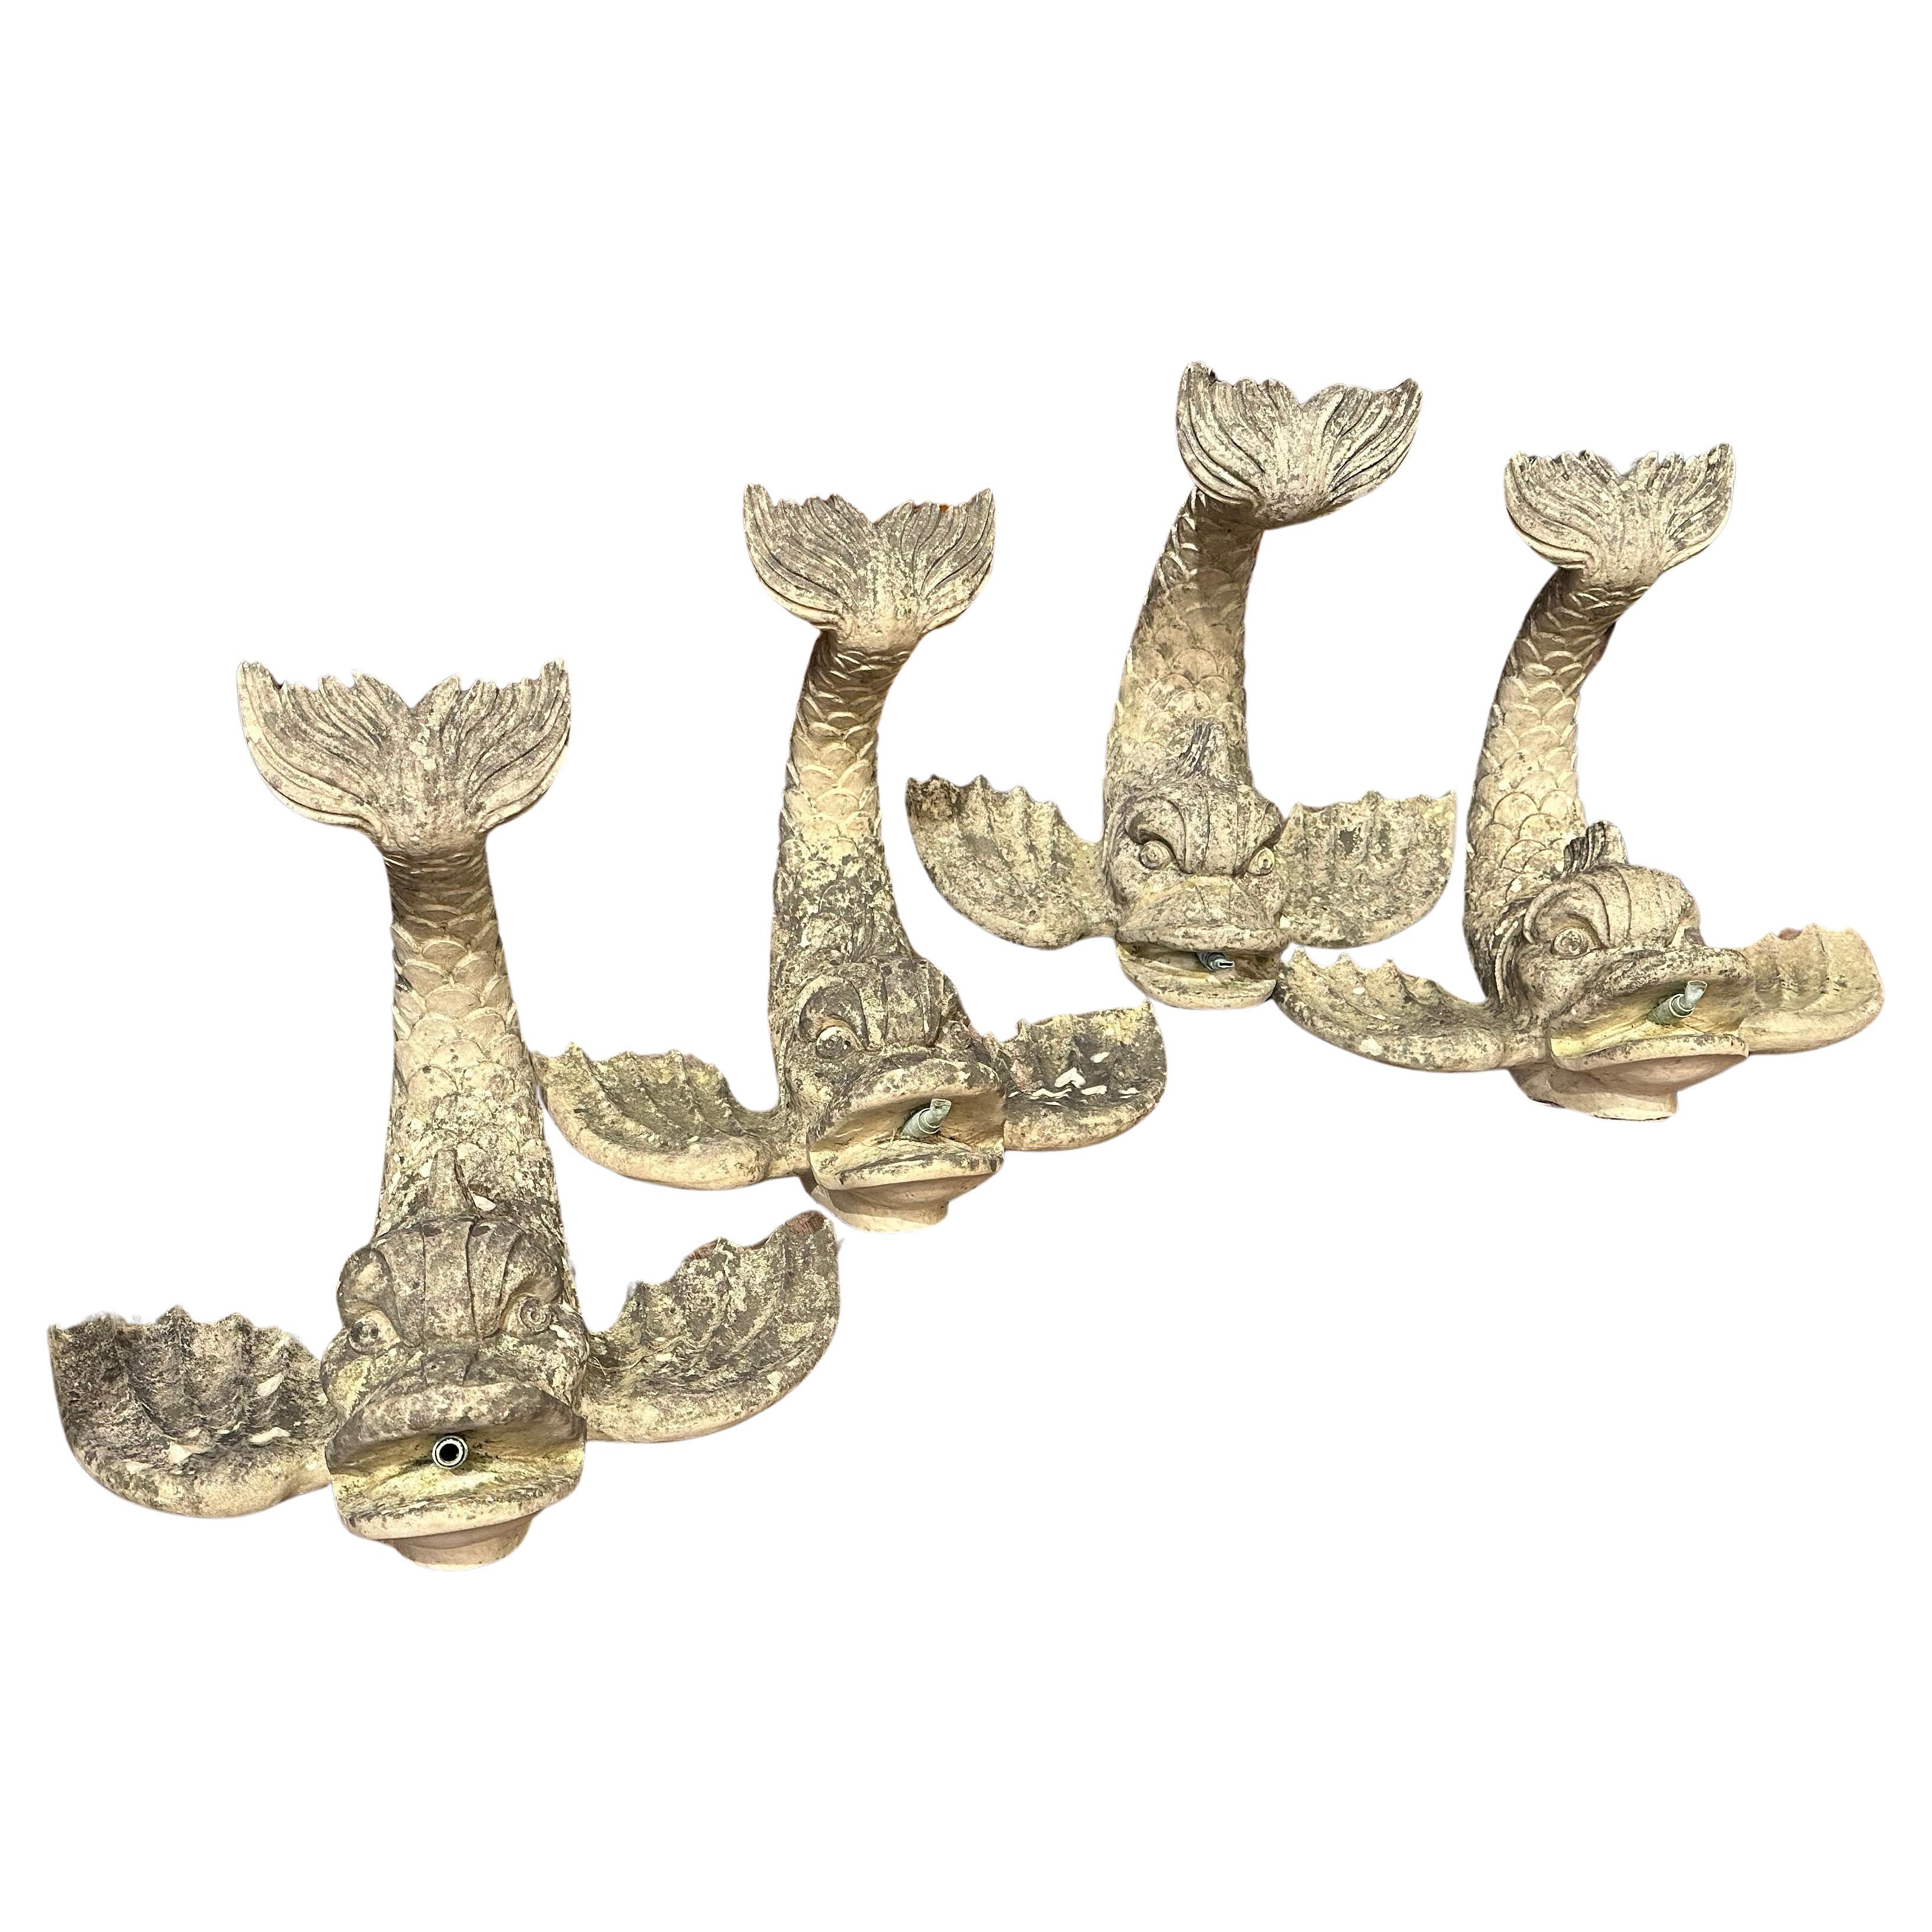 Four Stone Fish Fountains Regency 1820 For Sale